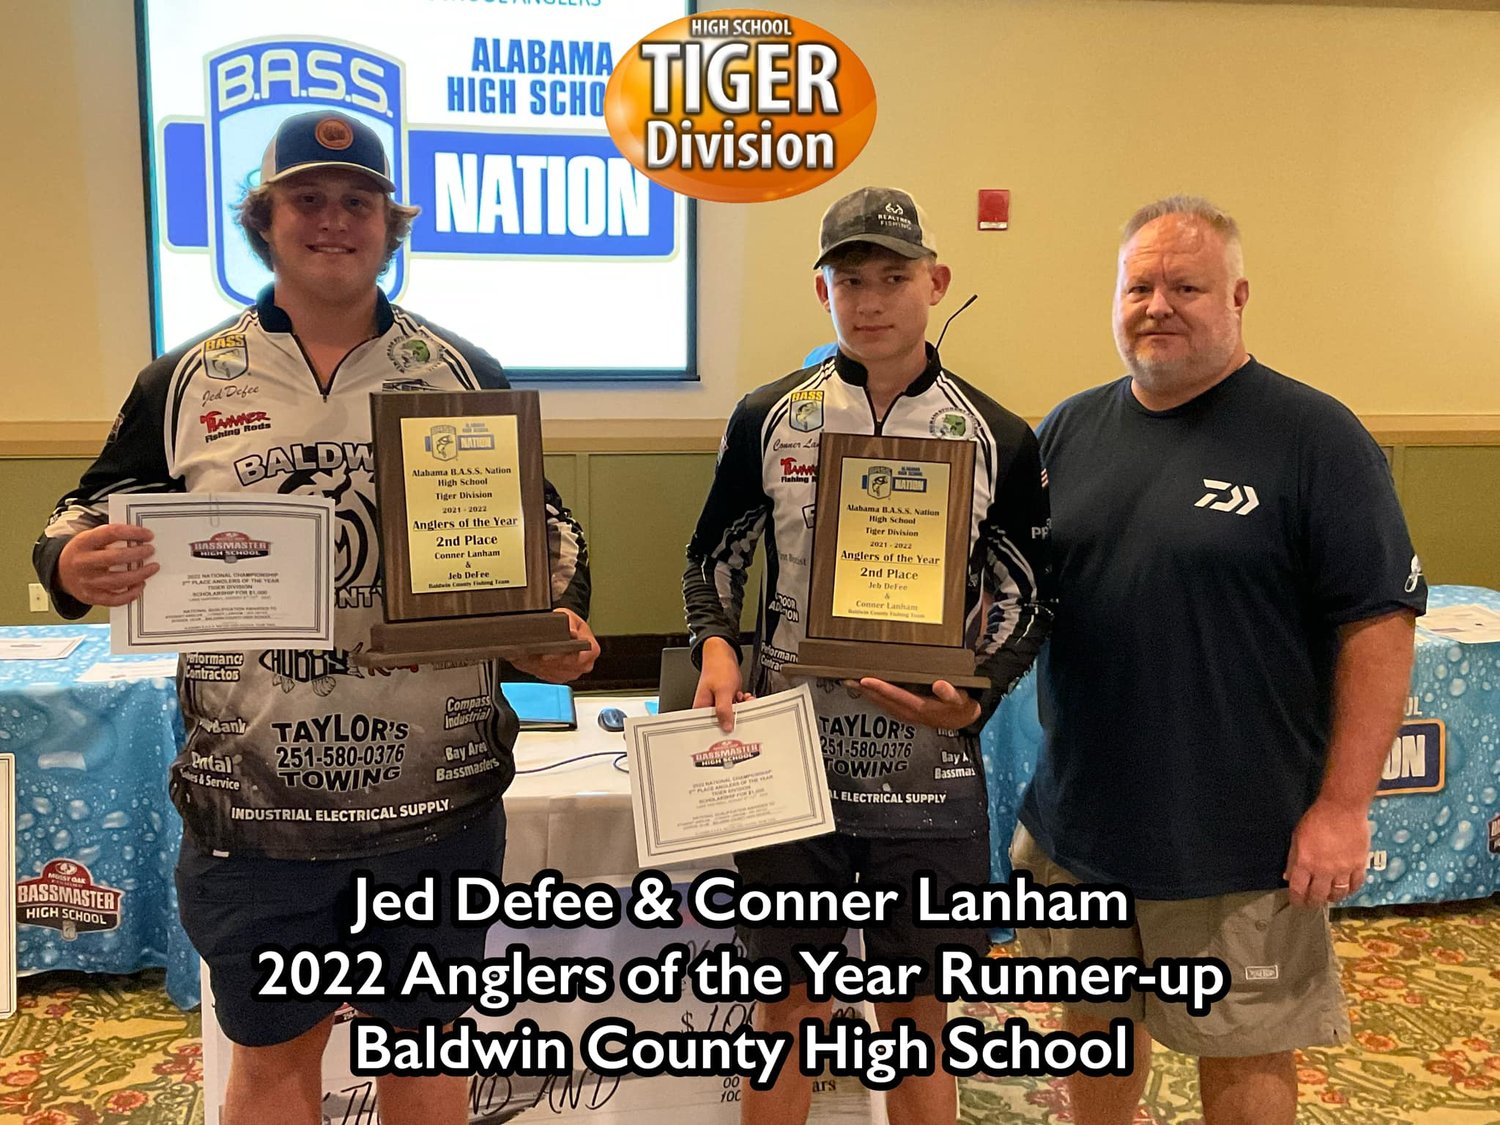 Jed Defee and Conner Lanham represented the Baldwin County High School fishing team as runners-up in the Angler of the Year competition.